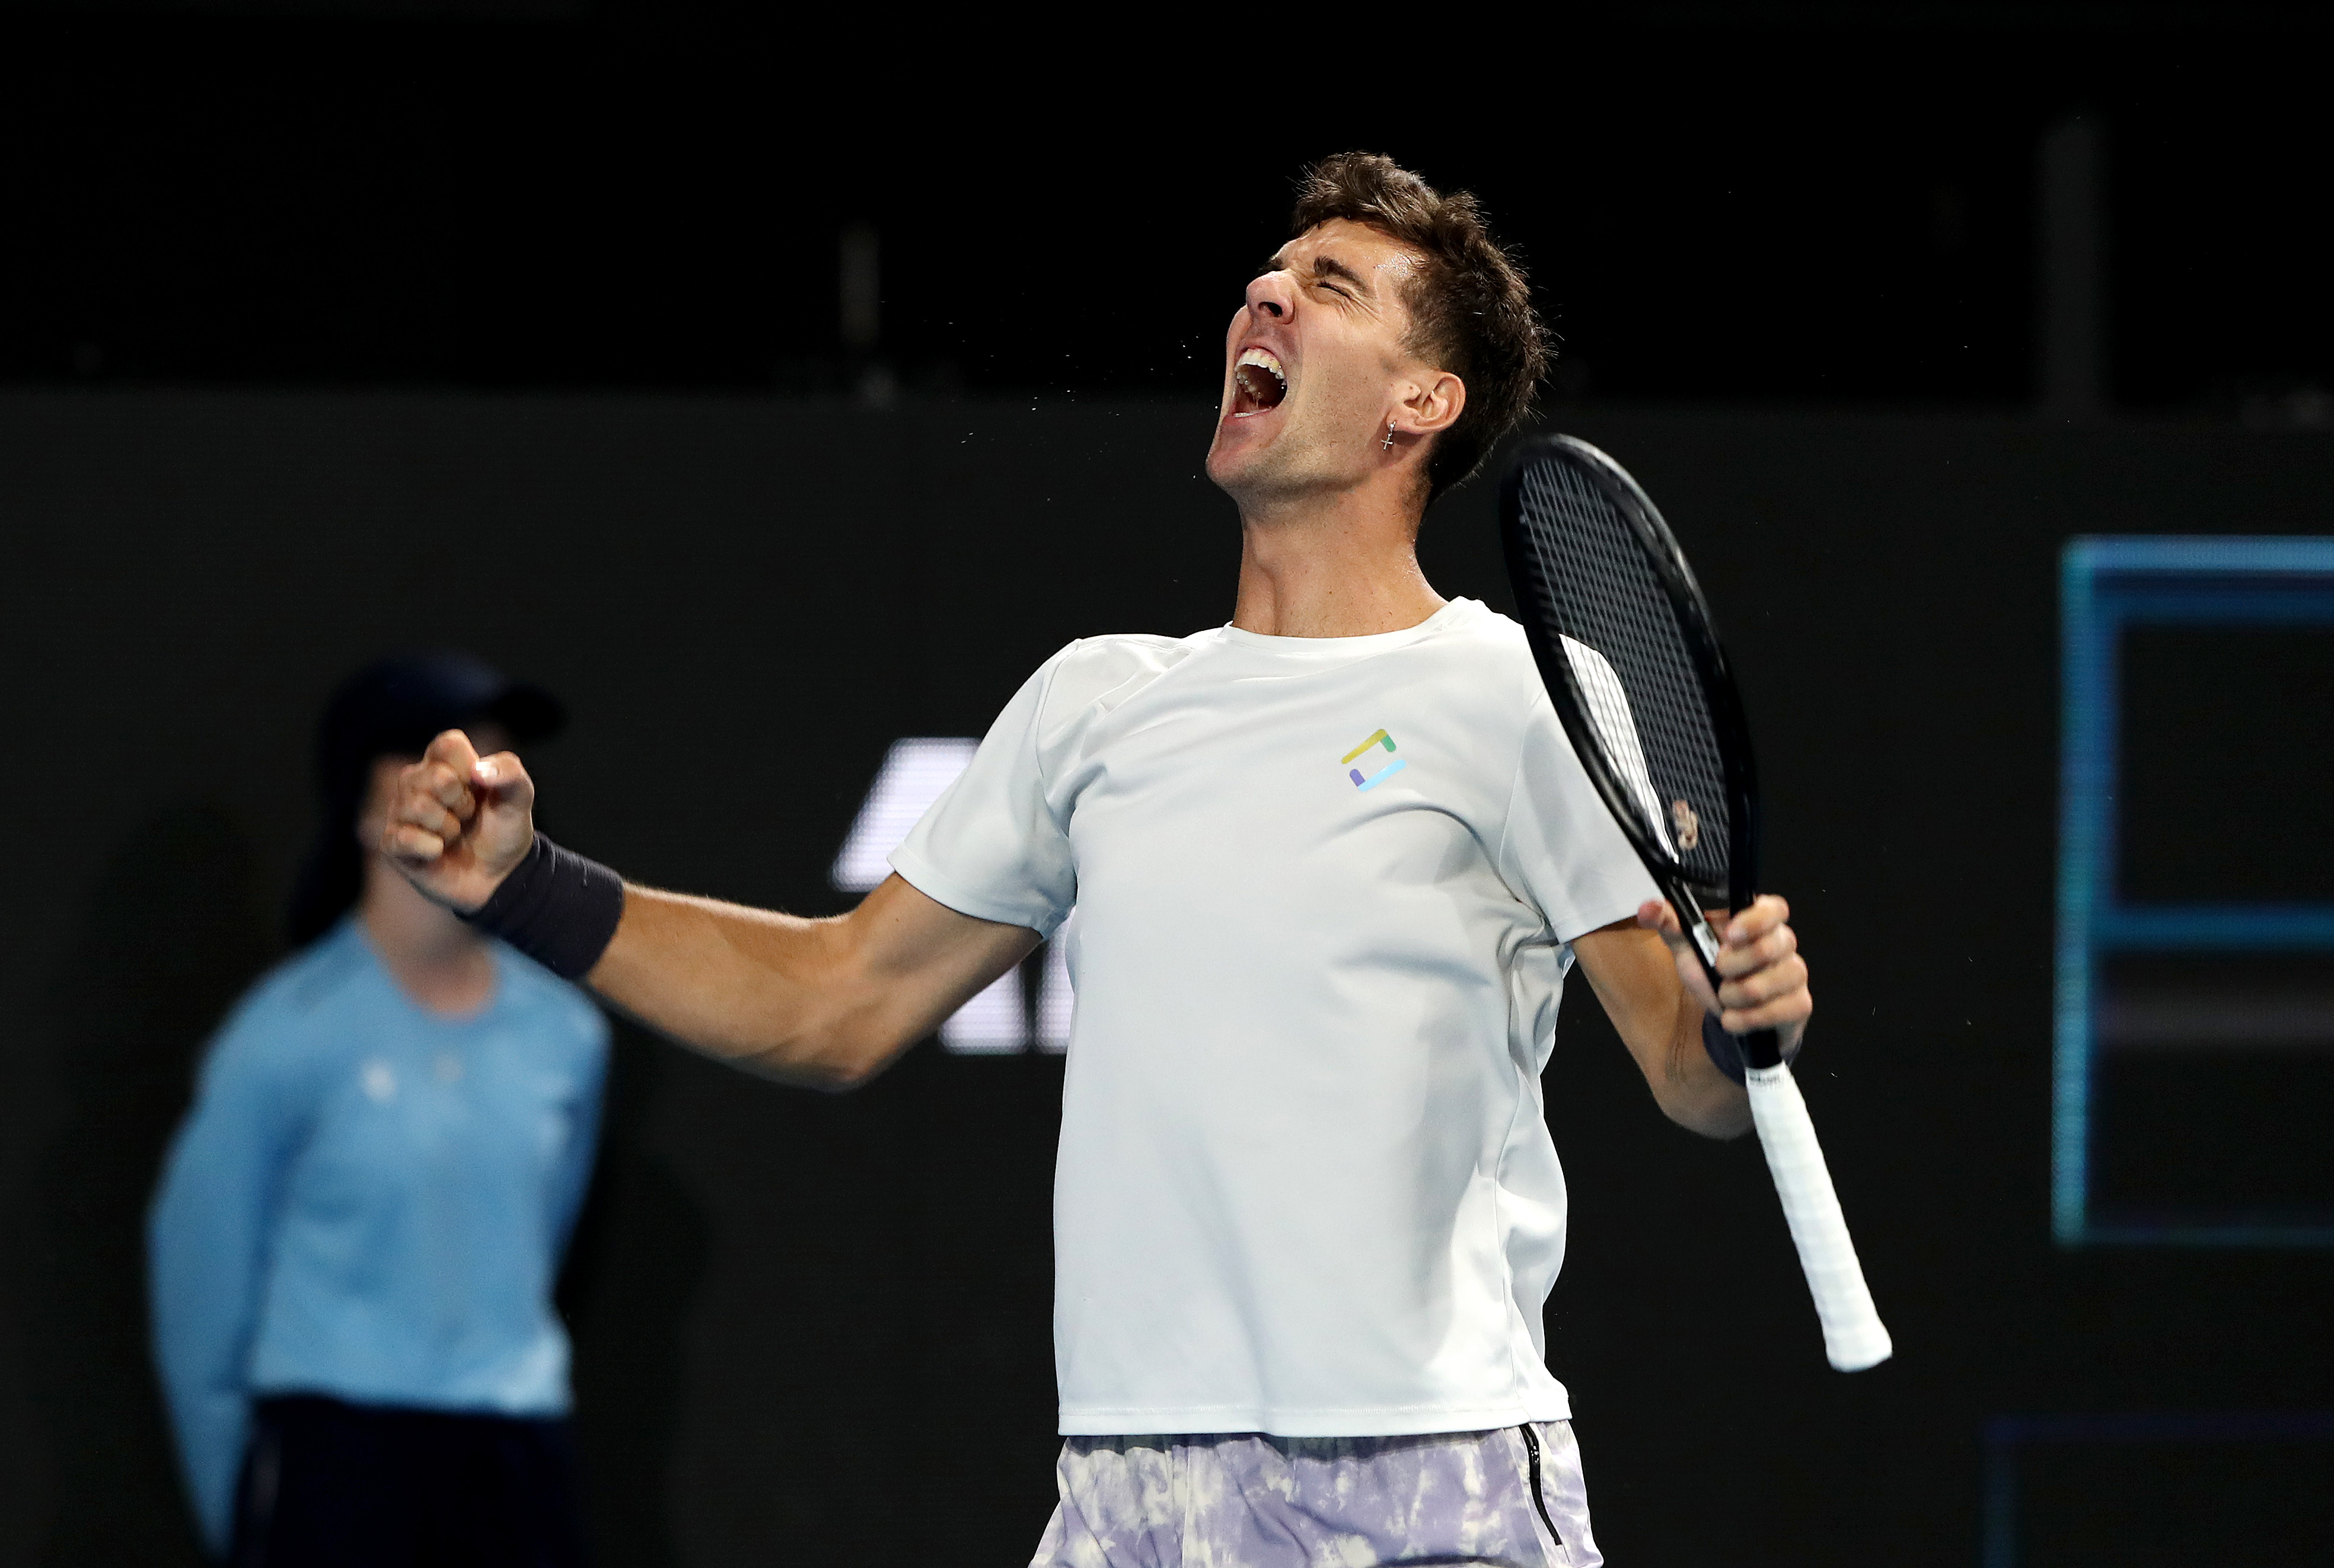 Thanasi Kokkinakis qualifies for first ATP Tour final since 2019 after victory over Marin Cilic, tennis news